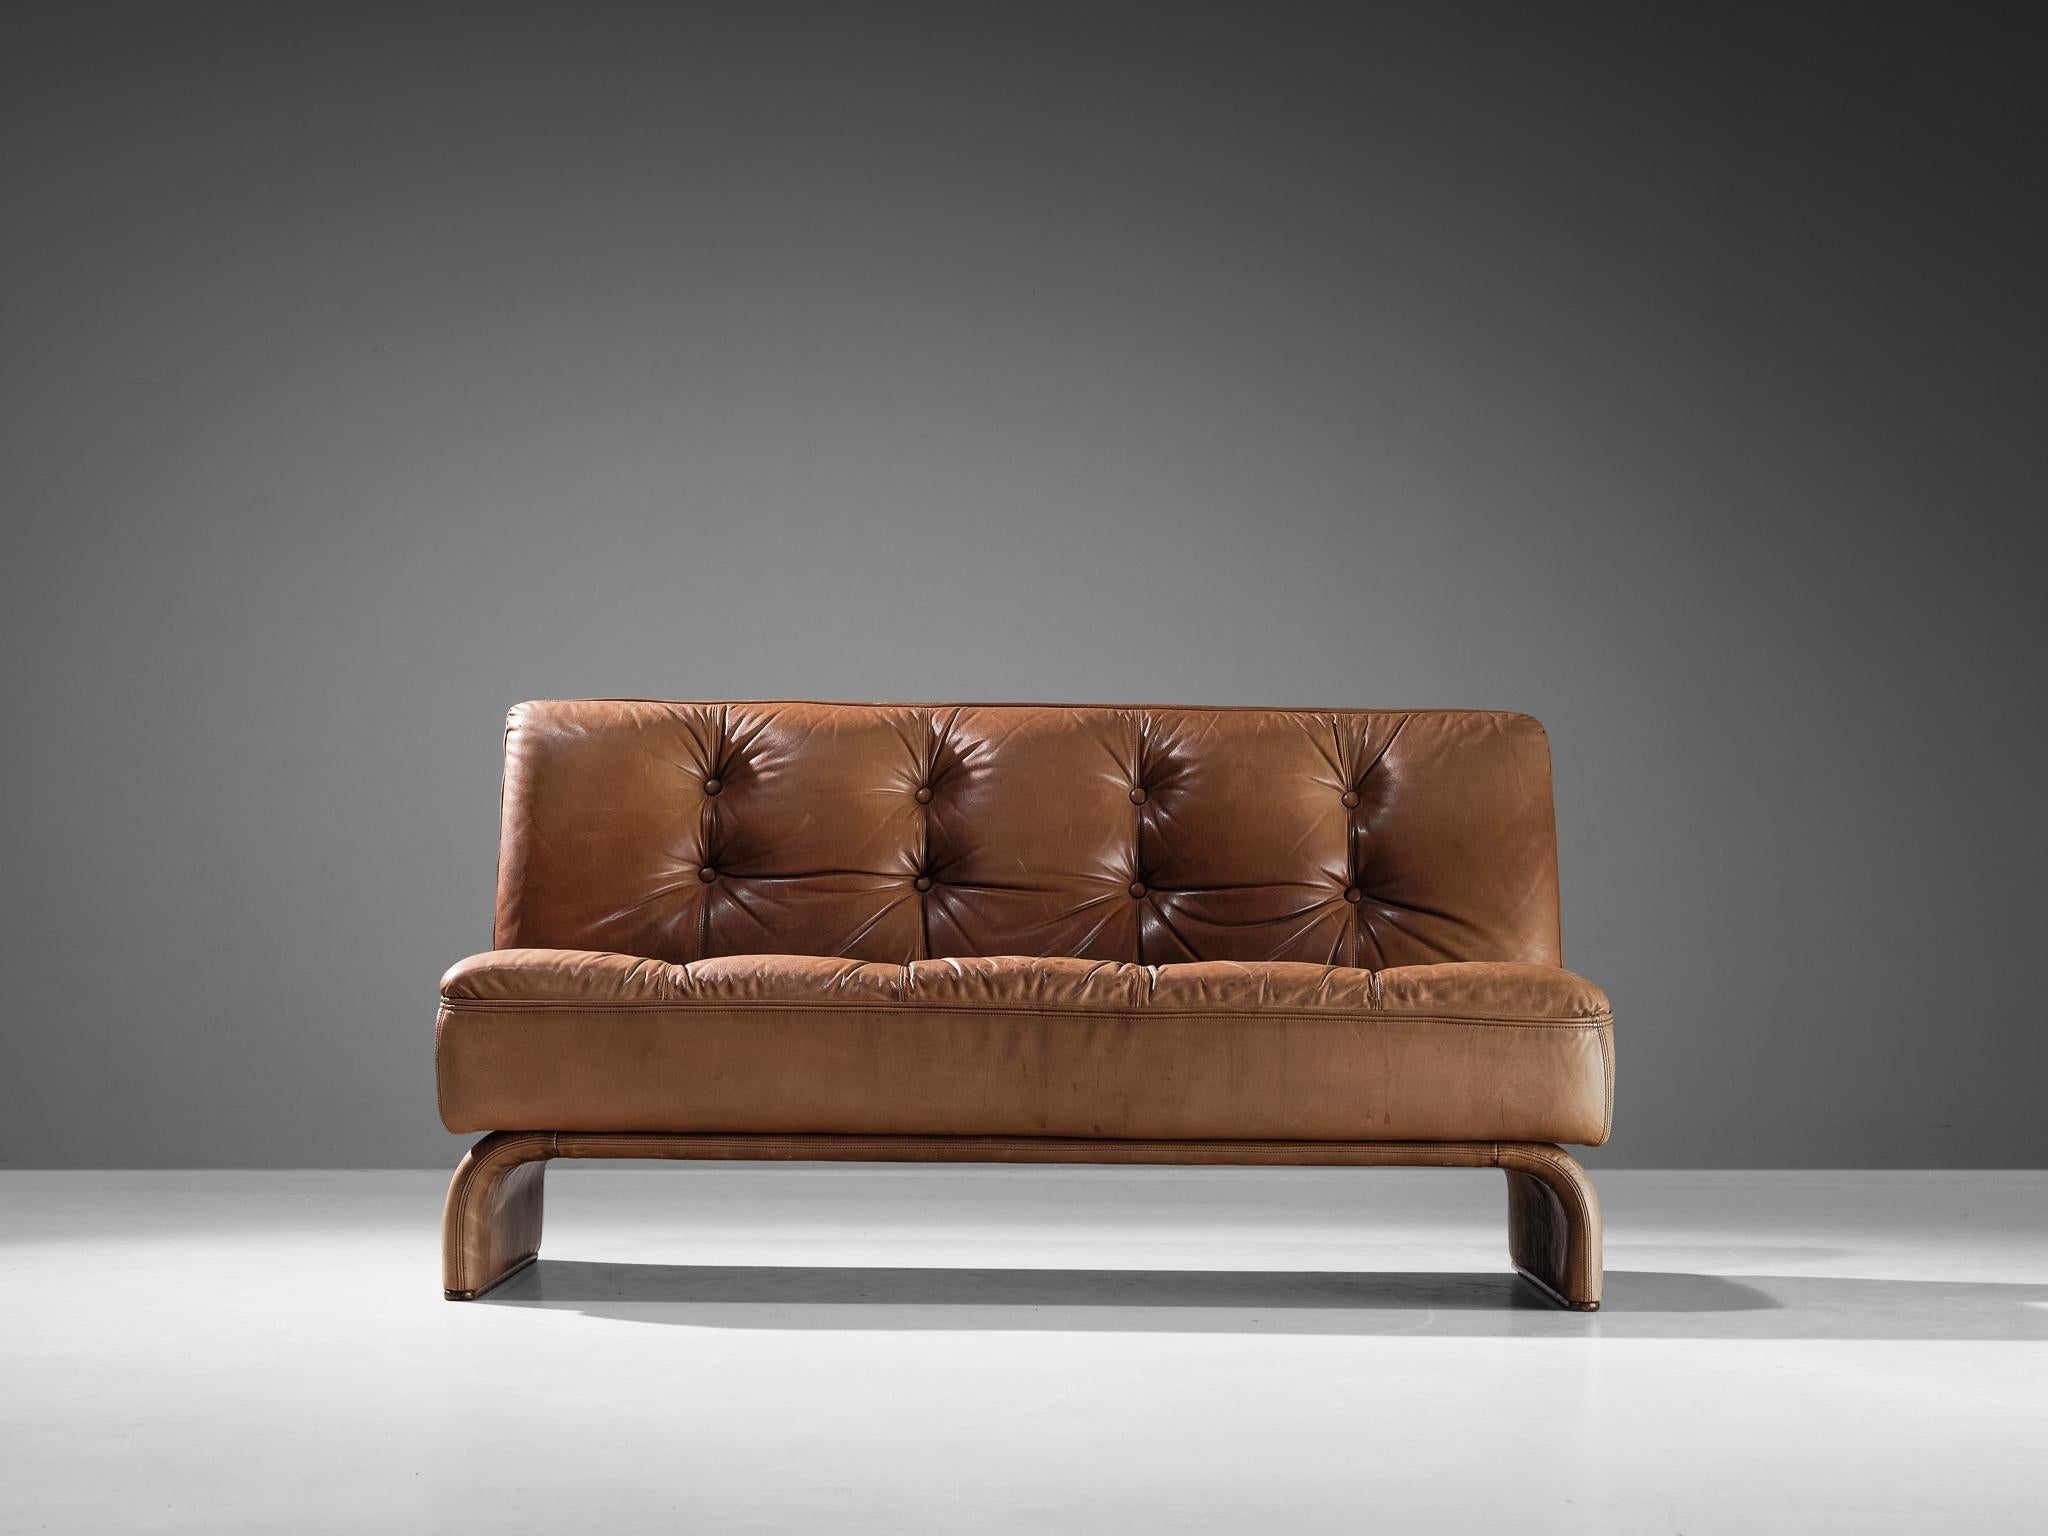 Johannes Spalt for Wittmann 'Constanze' Sofa or Daybed in Cognac Leather